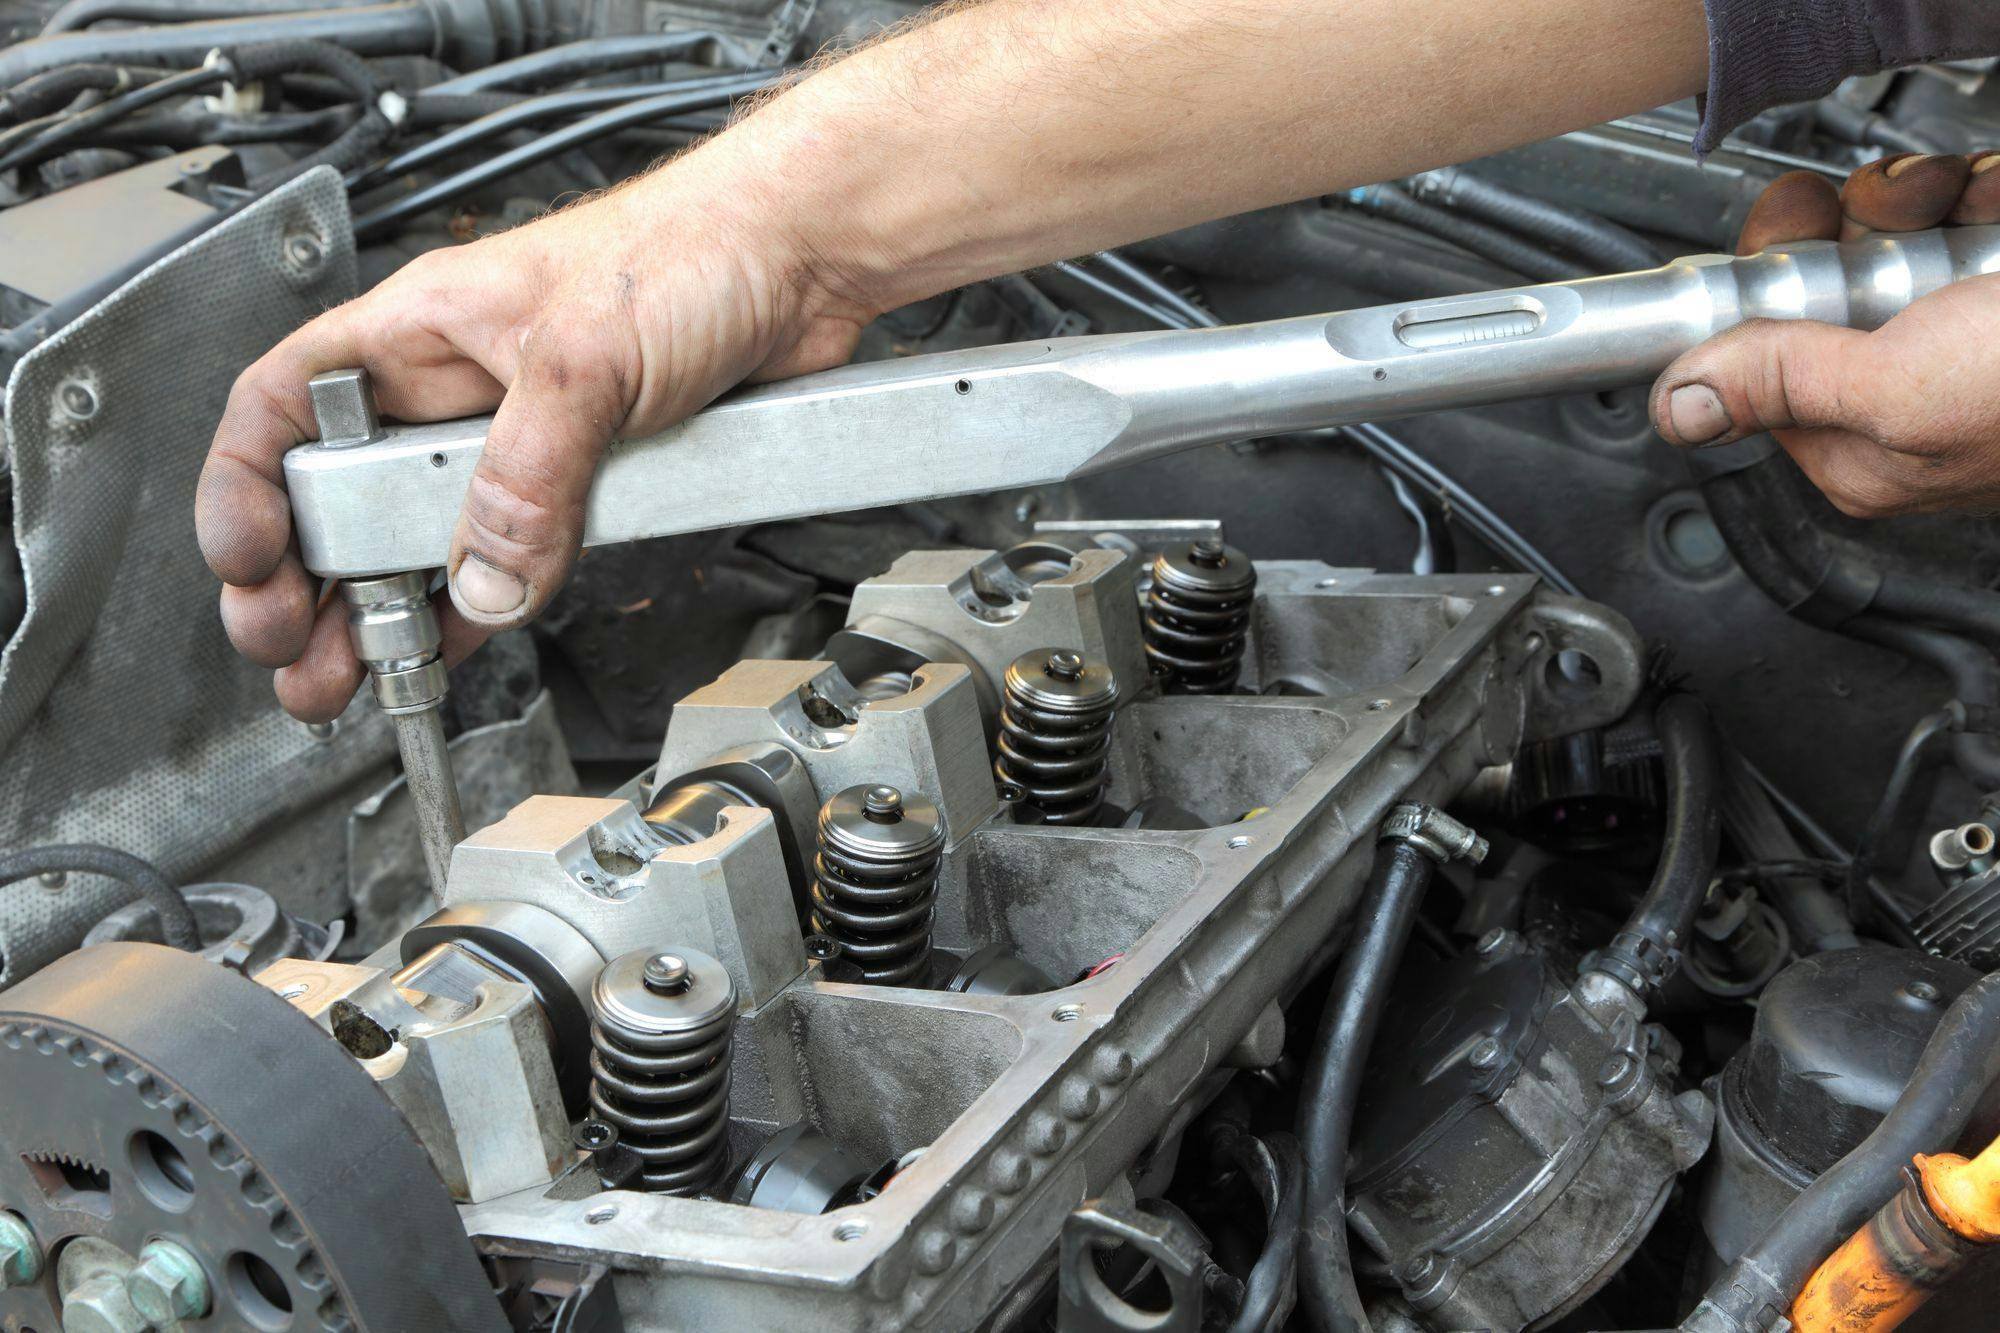 Discover how engine repair versus rebuilding affects your vehicle's lifespan. Make informed decisions to maximize the longevity of your truck.